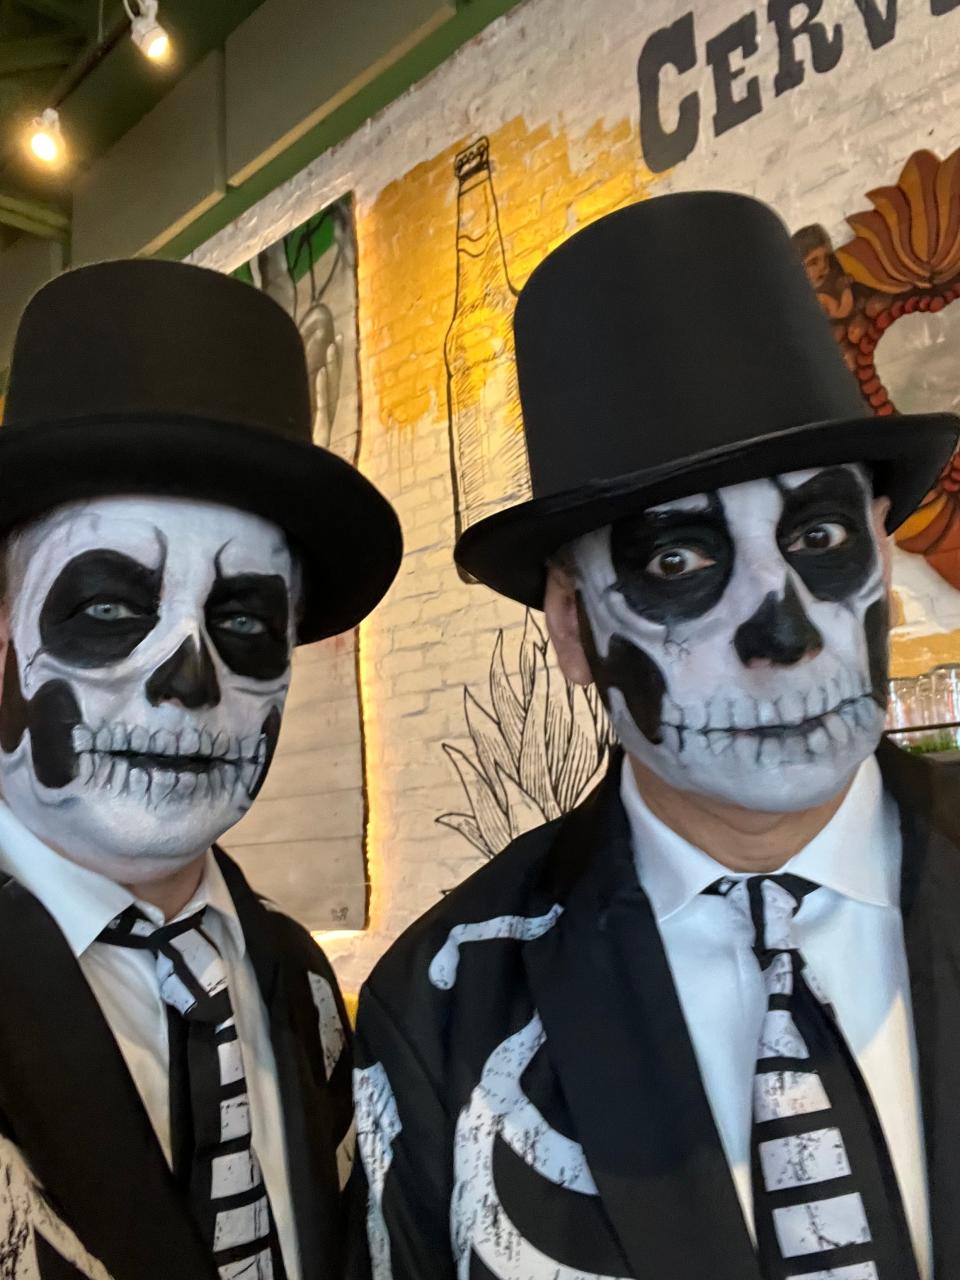 Avocado Cantina will take over Downtown Palm Beach Gardens on Saturday, Oct. 28 for their "Noche de los Muertos" Halloween Fiesta. Dress to impress, enjoy Halloween themed beverages and dance the night away.